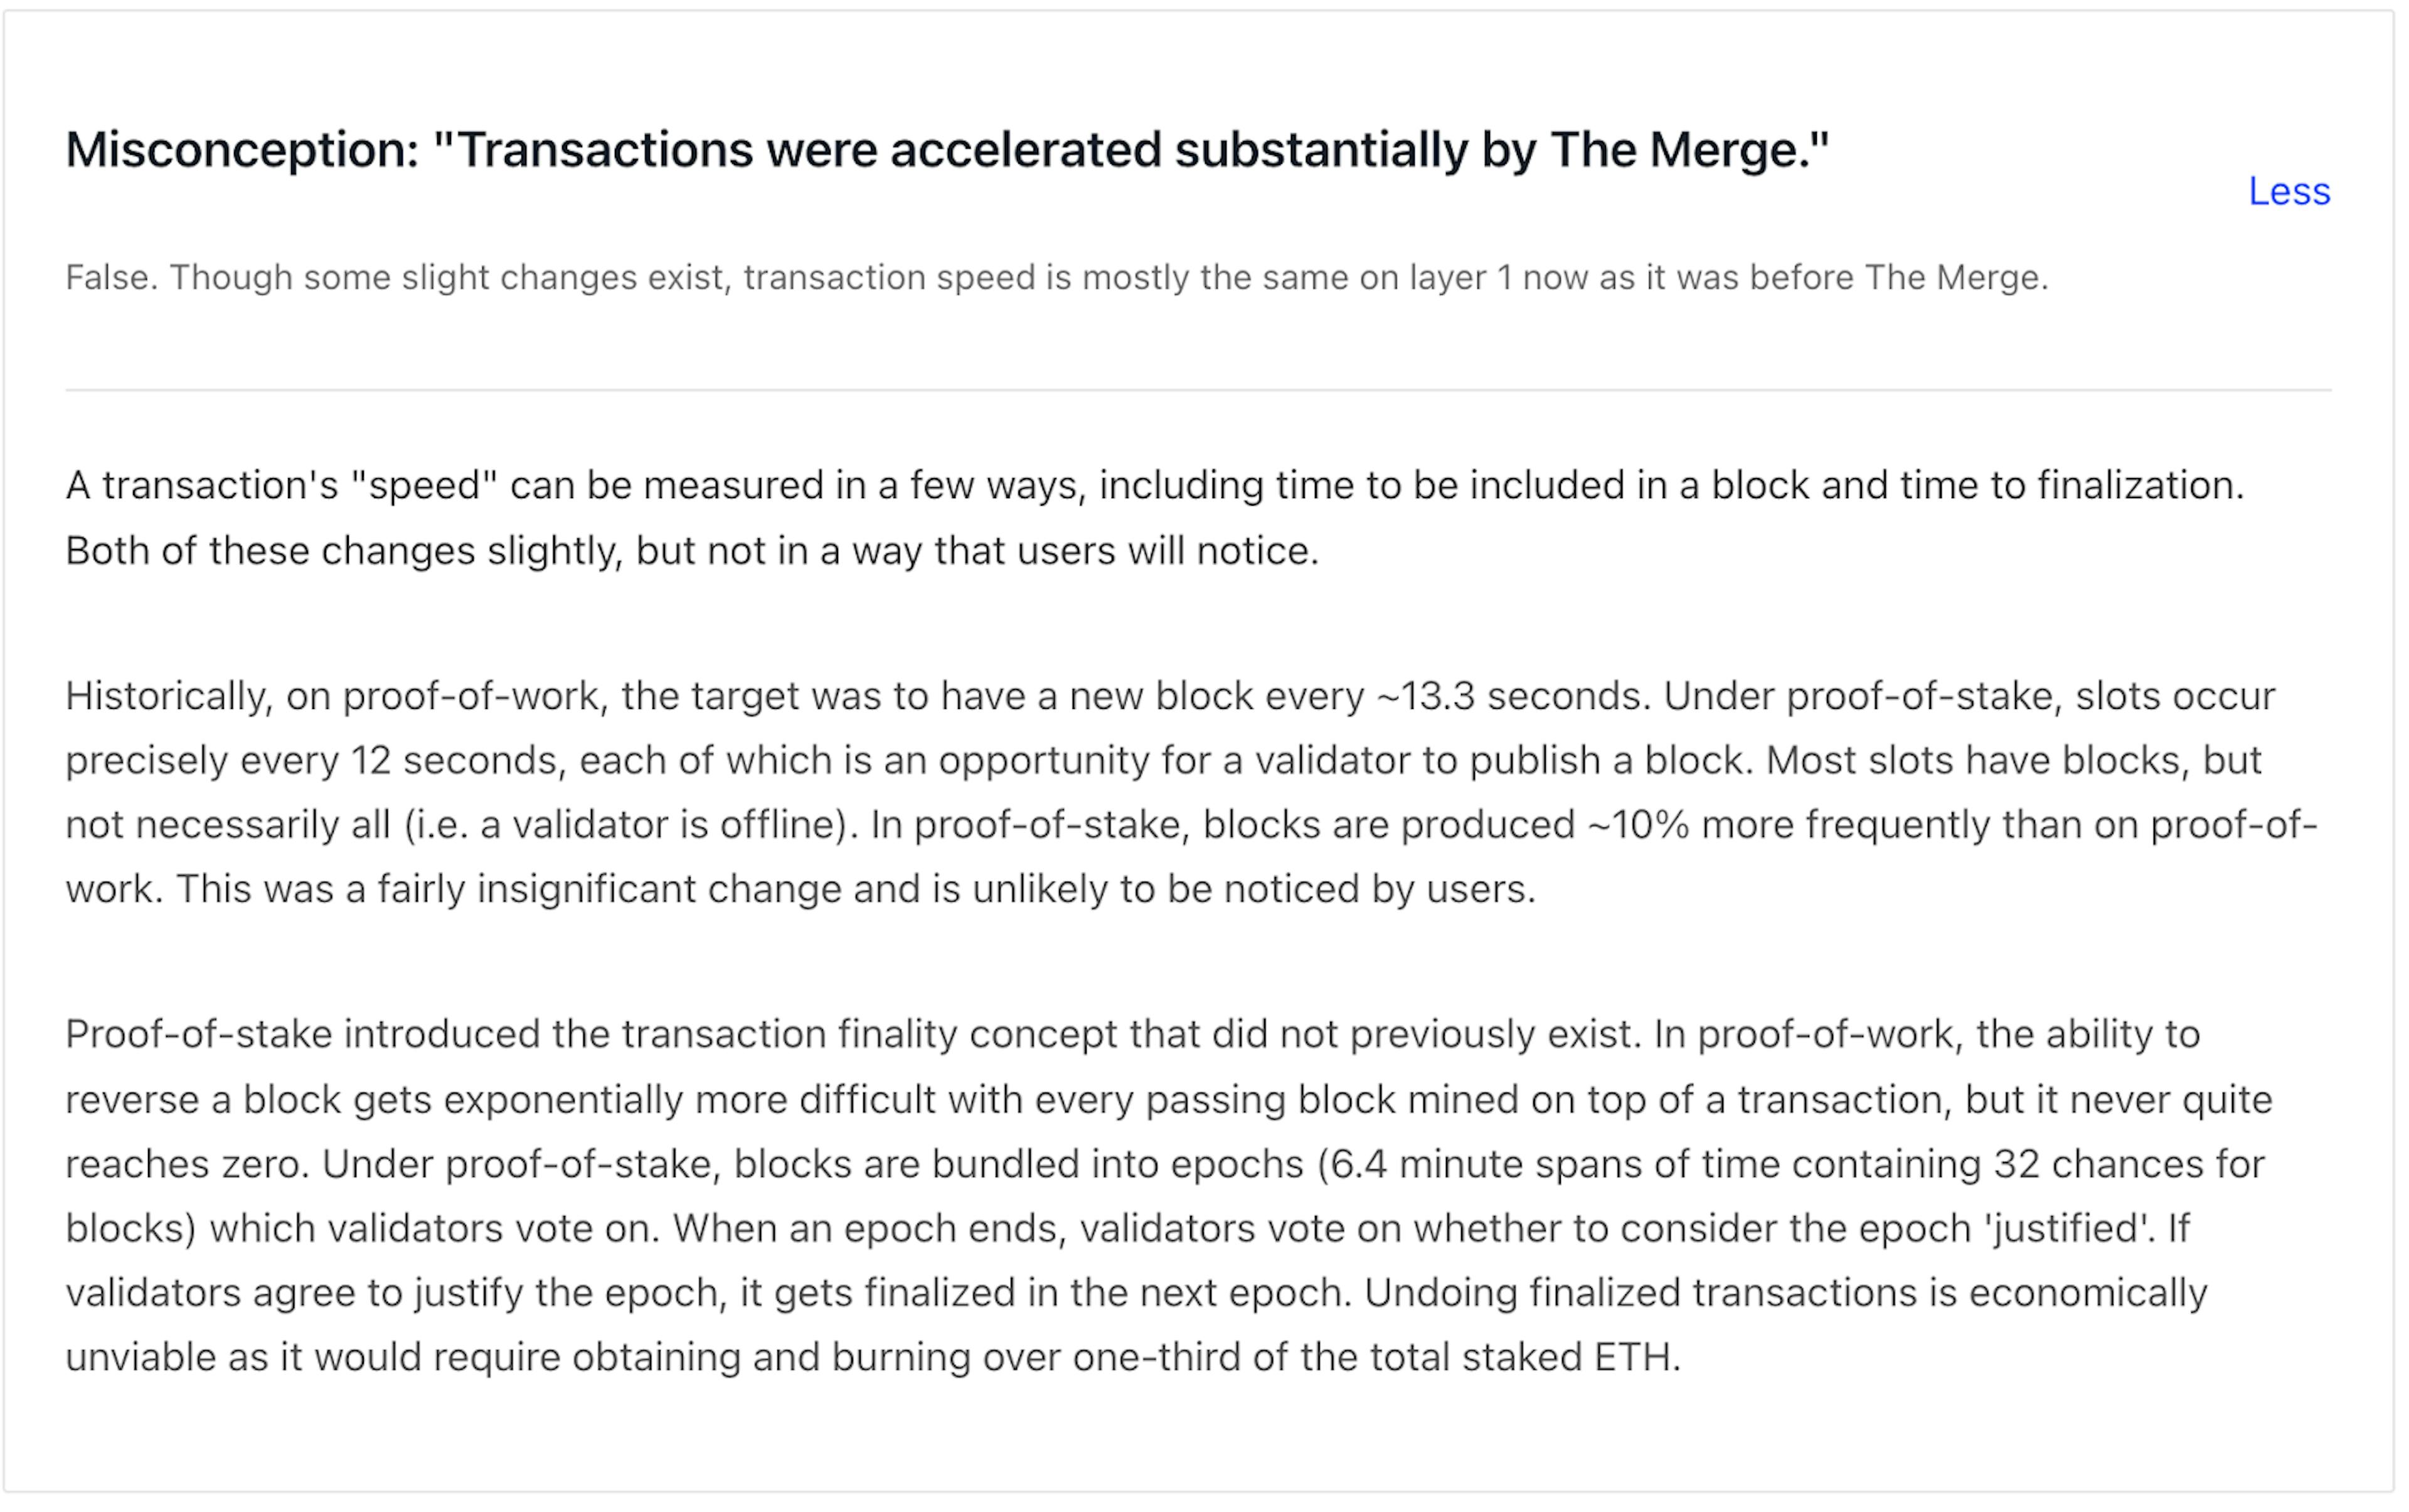 Misconceptions about the Eth merge